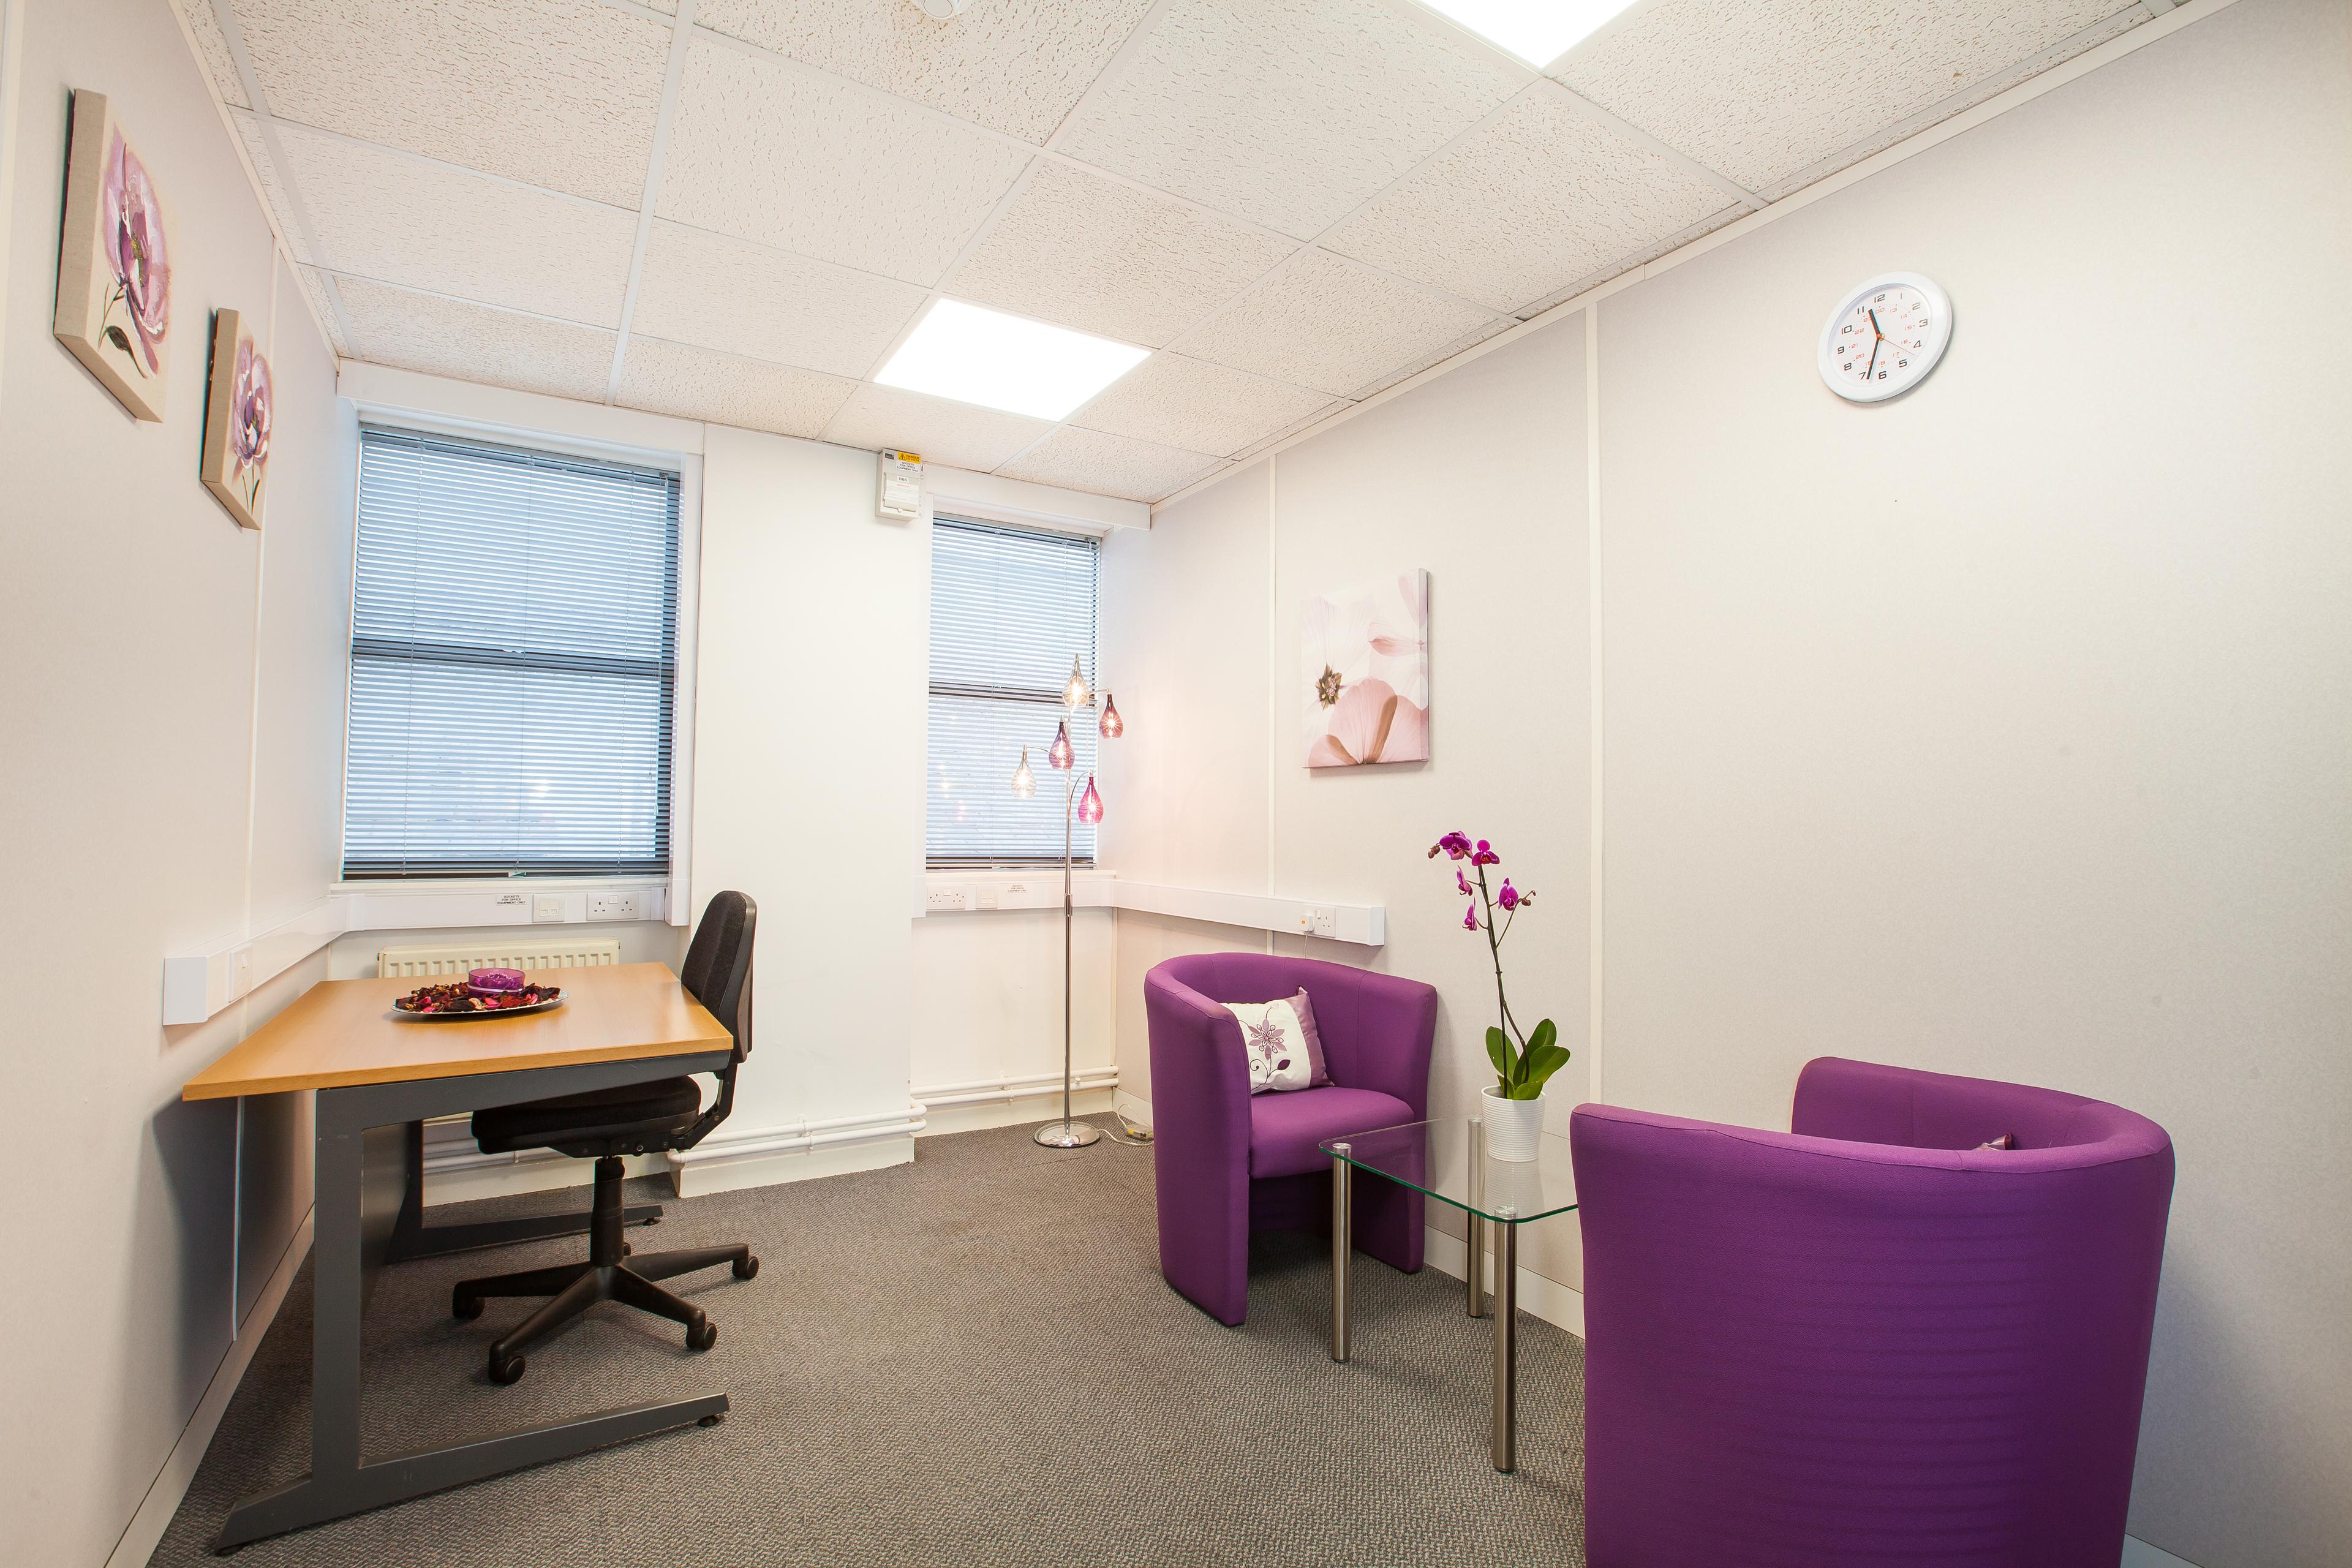 Small Meeting/counselling Room, The Hub Business Centre Ipswich Ltd photo #1